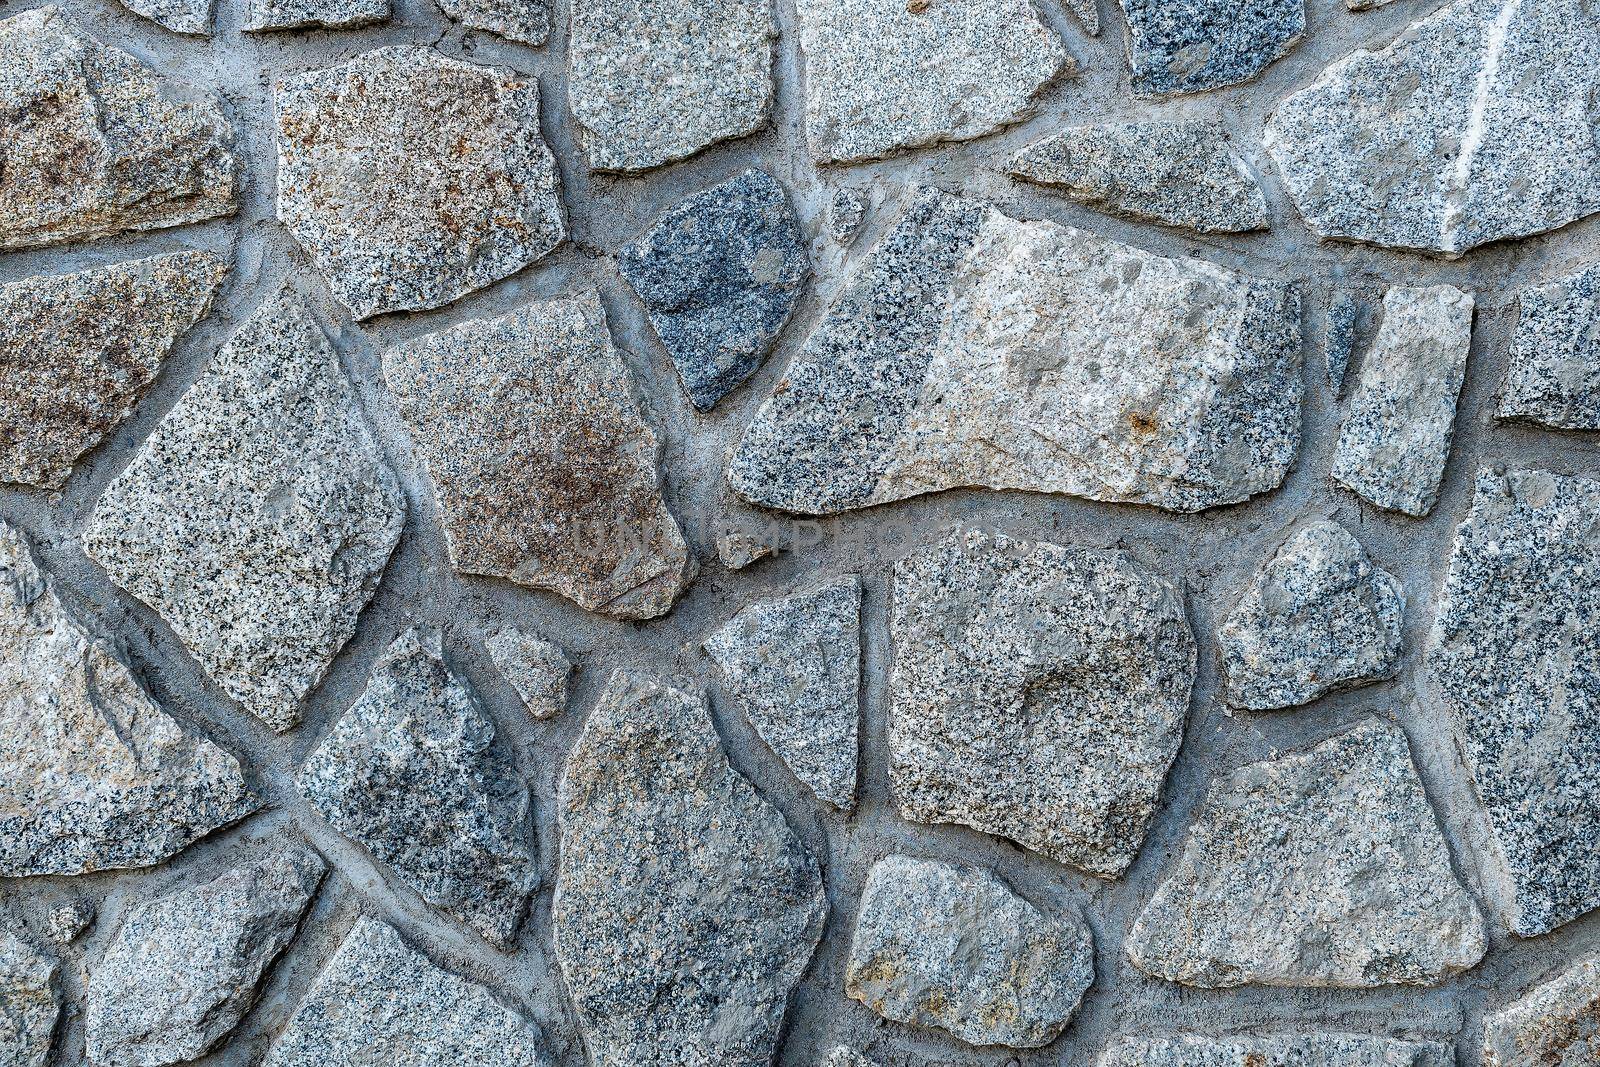 An area composed of large, gray irregular stones Texture, background for further work.